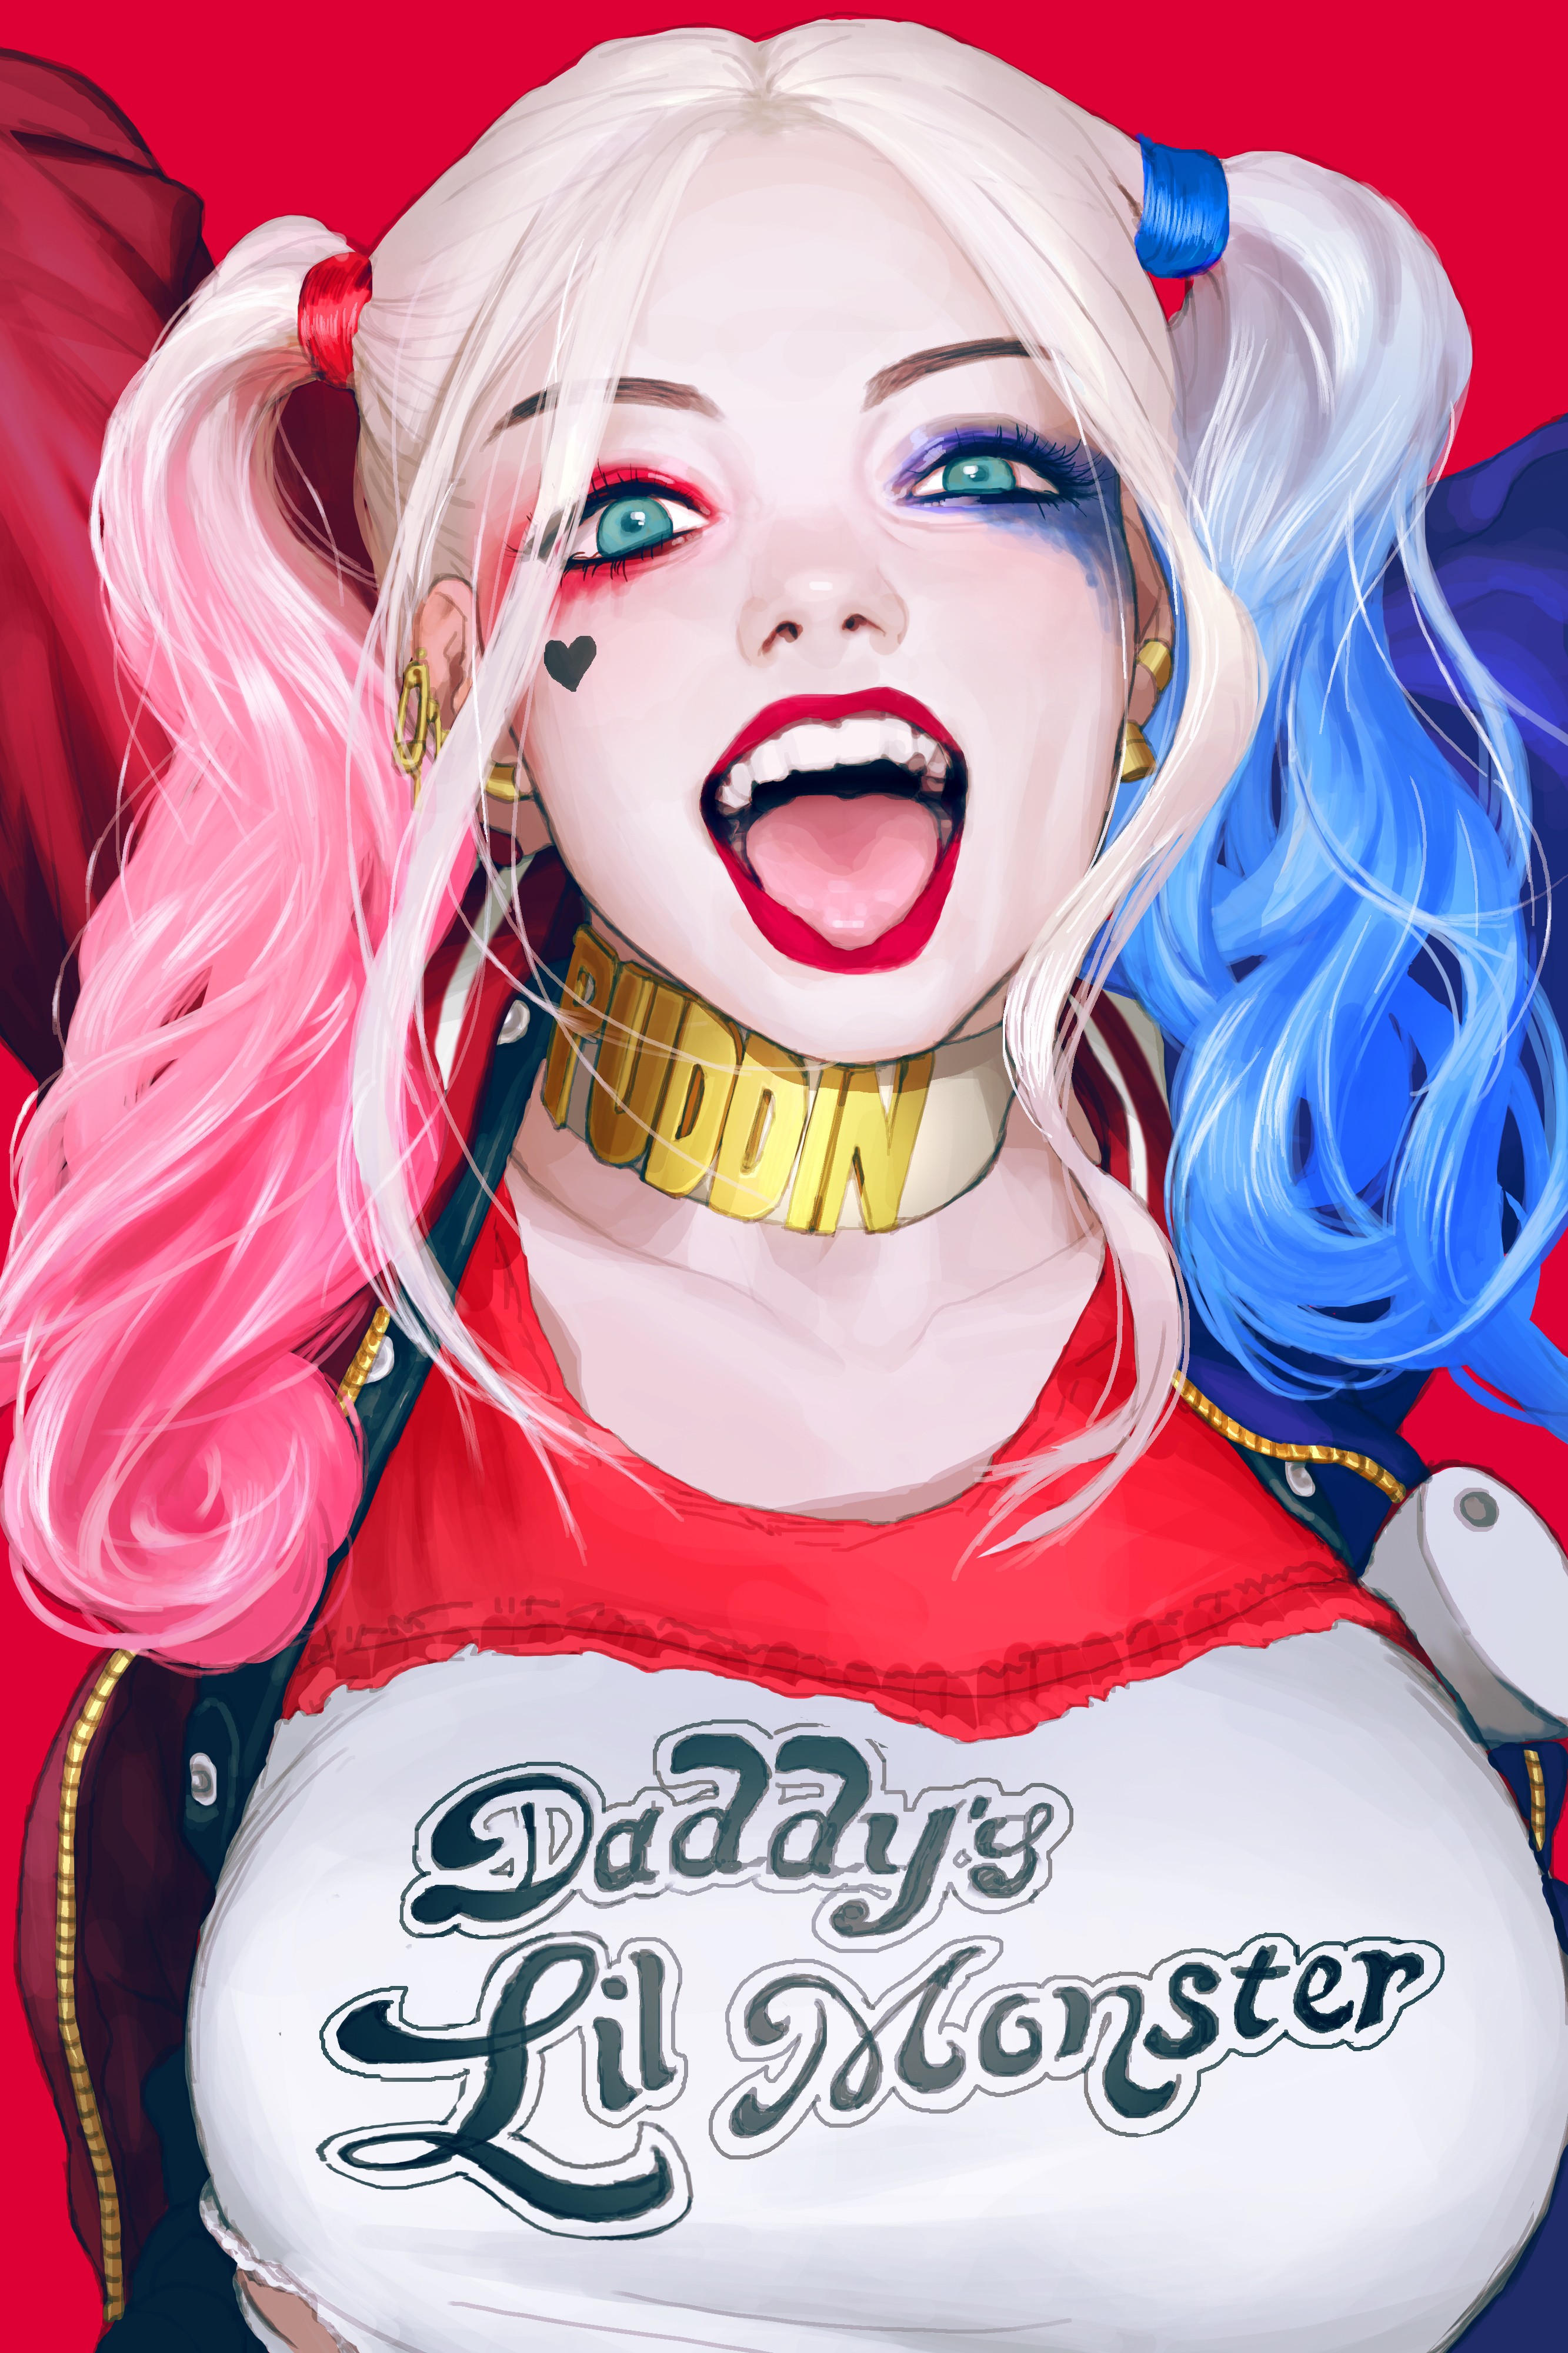 General 2666x4000 Harley Quinn Suicide Squad Batman villains women open mouth makeup red lipstick blue eyes pink hair blue hair looking at viewer red background comics DC Comics